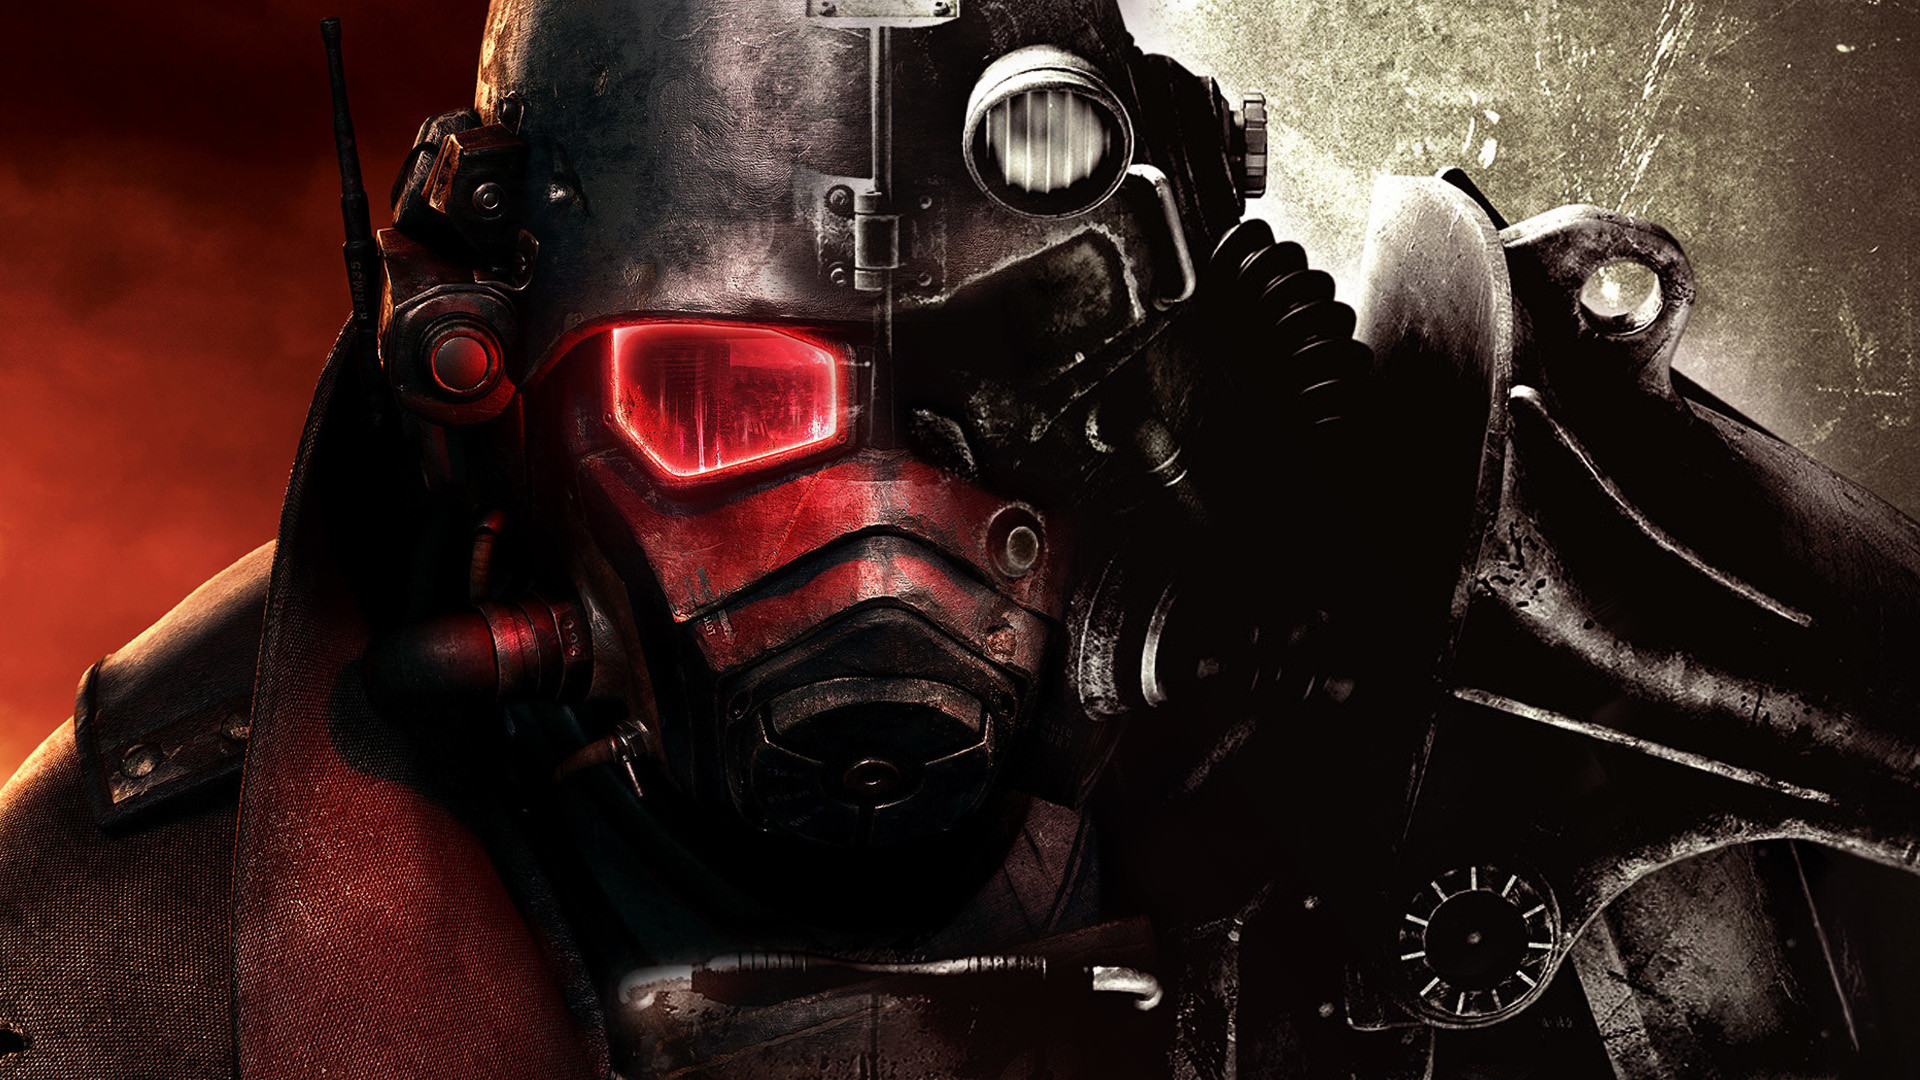 1920x1080 Fallout Wallpapers - HD Wallpapers Backgrounds of Your Choice